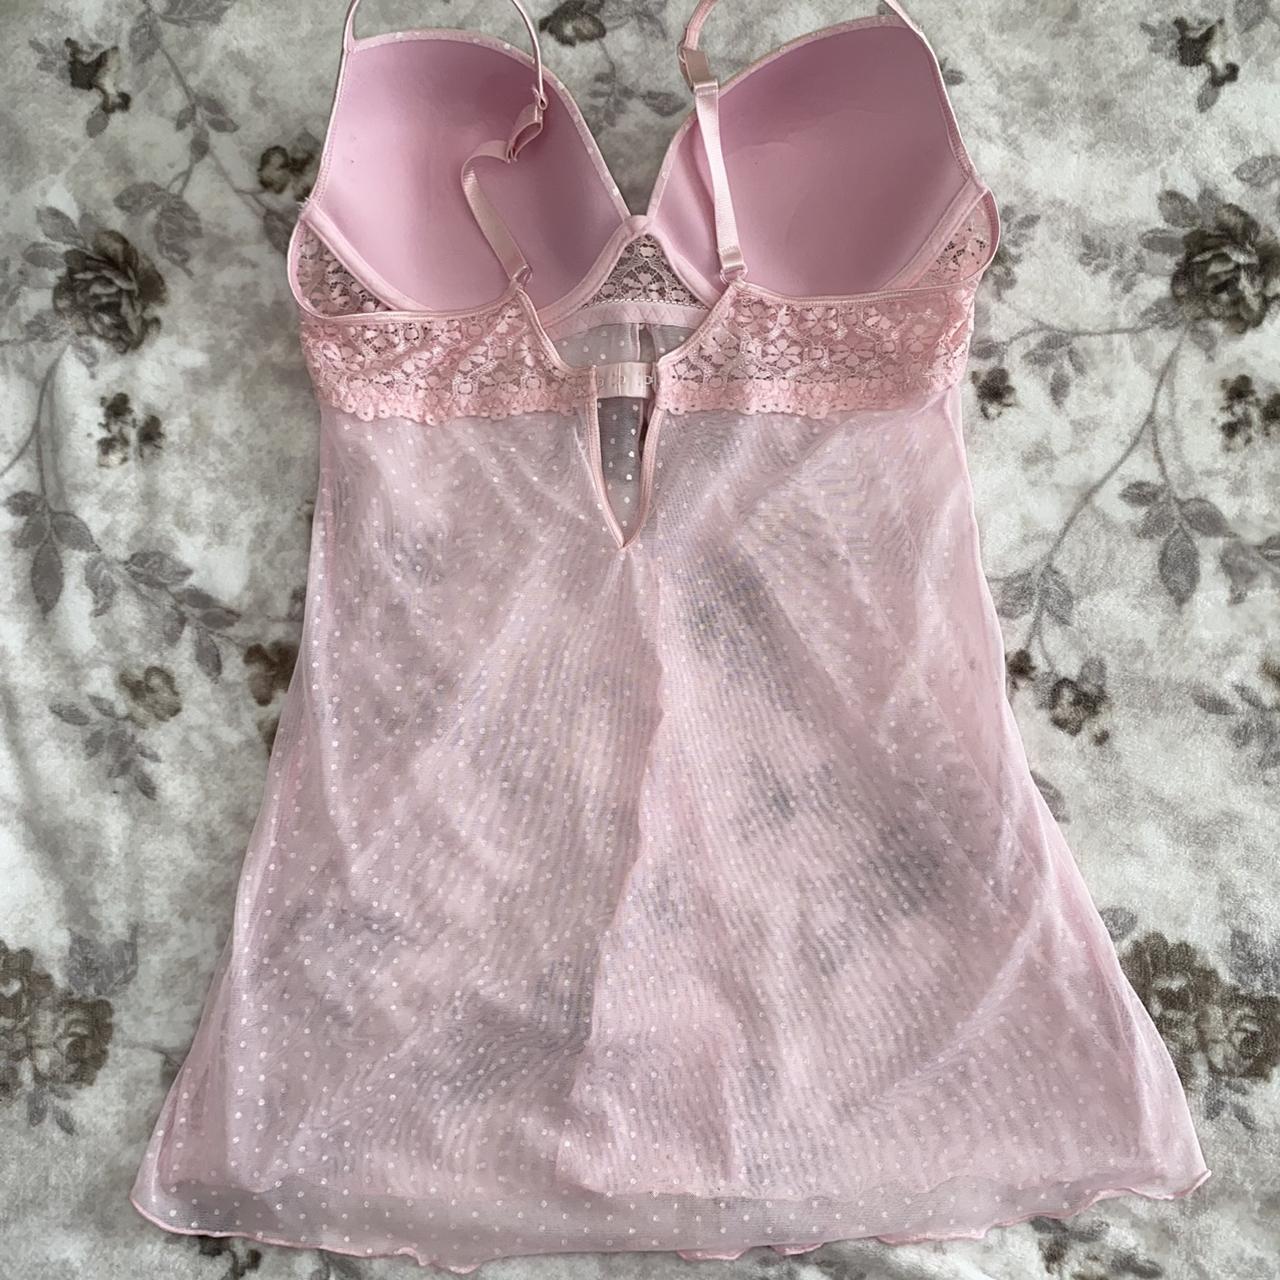 Product Image 3 - Dainty Baby Pink lingerie piece

38C